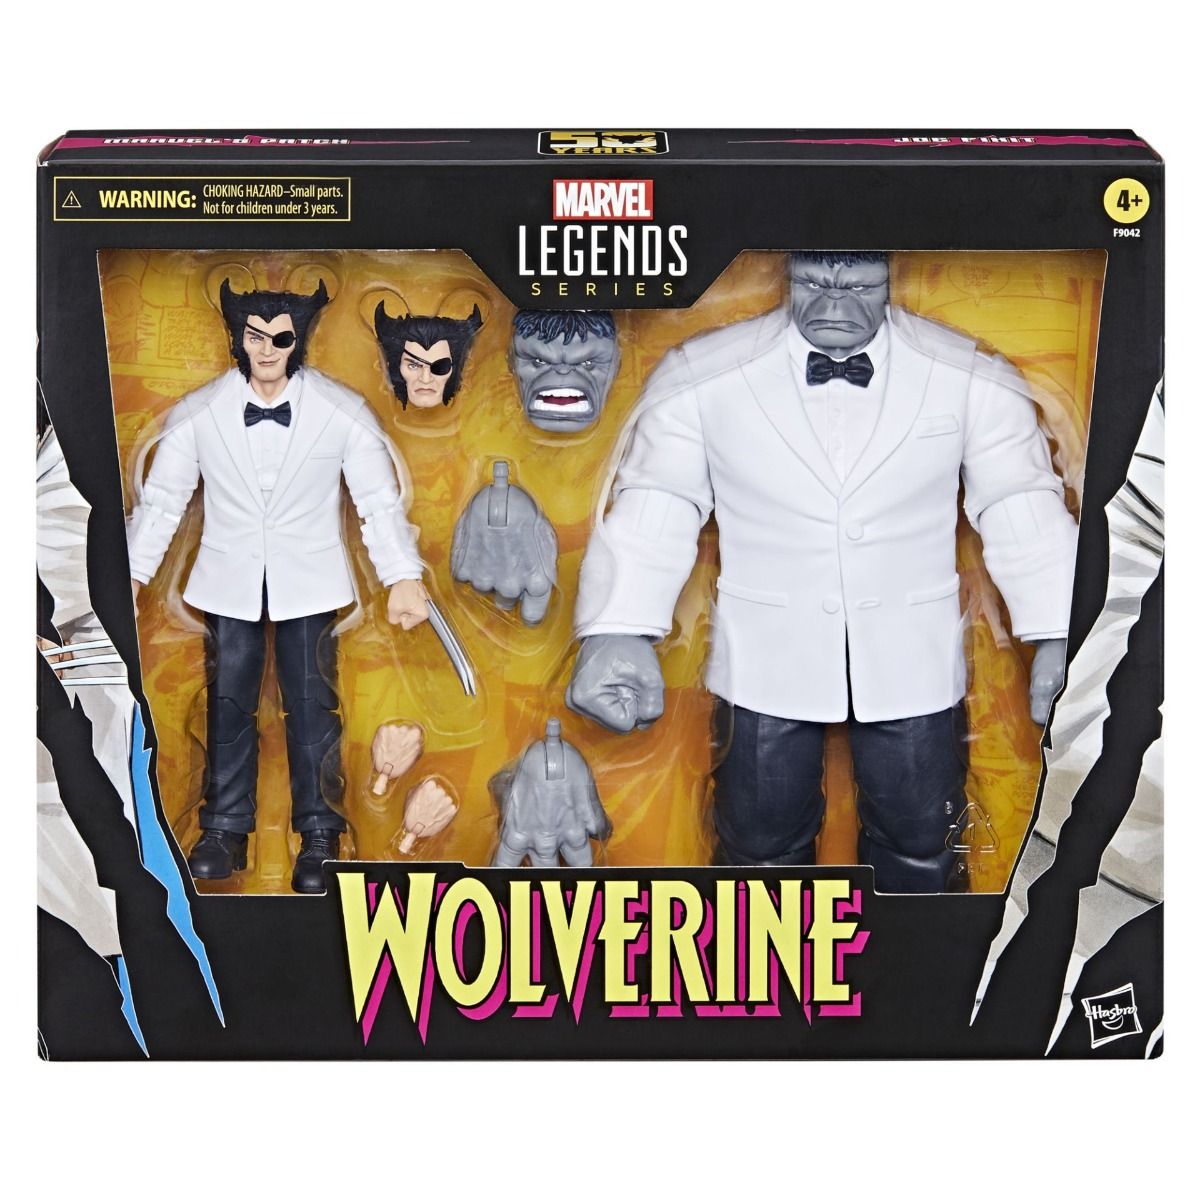 Marvel Legends Wolverine 50th Anniv Patch and Joe Fixit Comic 6-Inch Action Figure 2-Pack画像